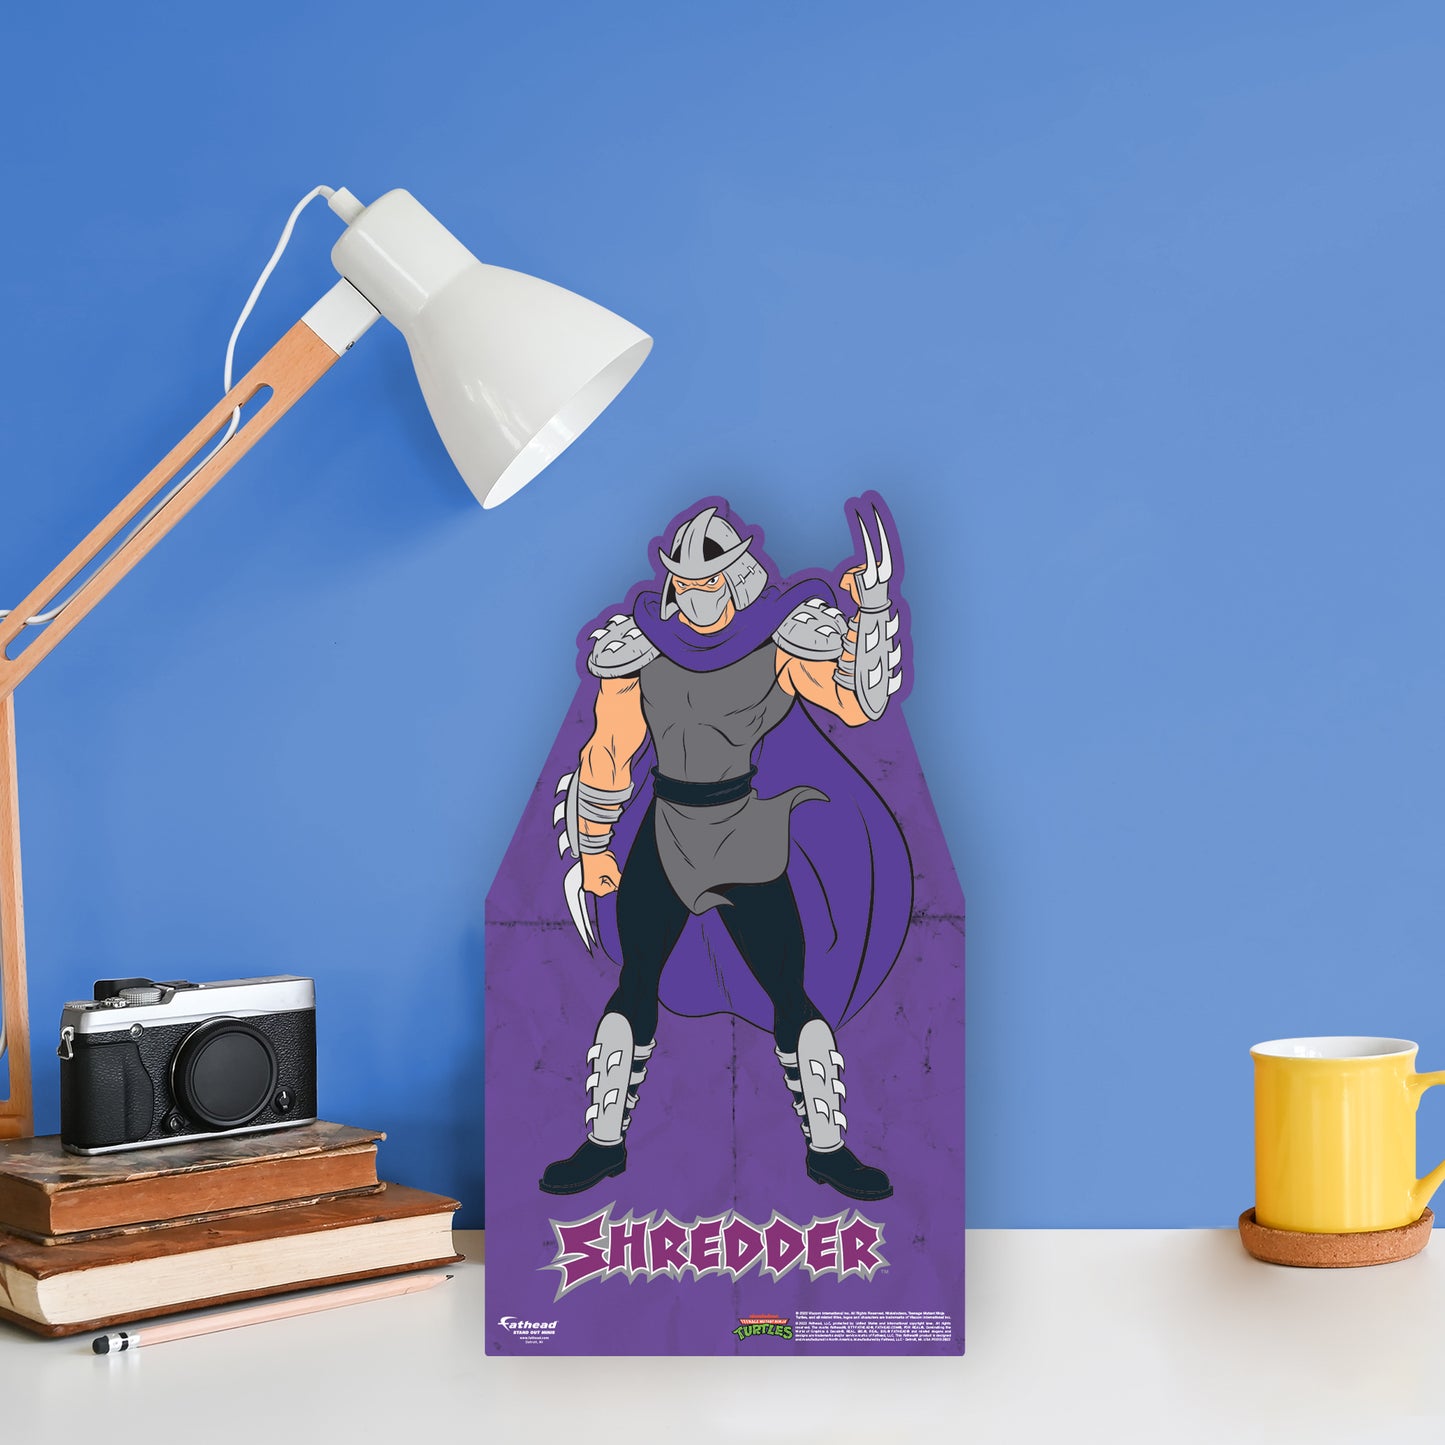 Teenage Mutant Ninja Turtles: Shredder Mini Cardstock Cutout - Officially Licensed Nickelodeon Stand Out